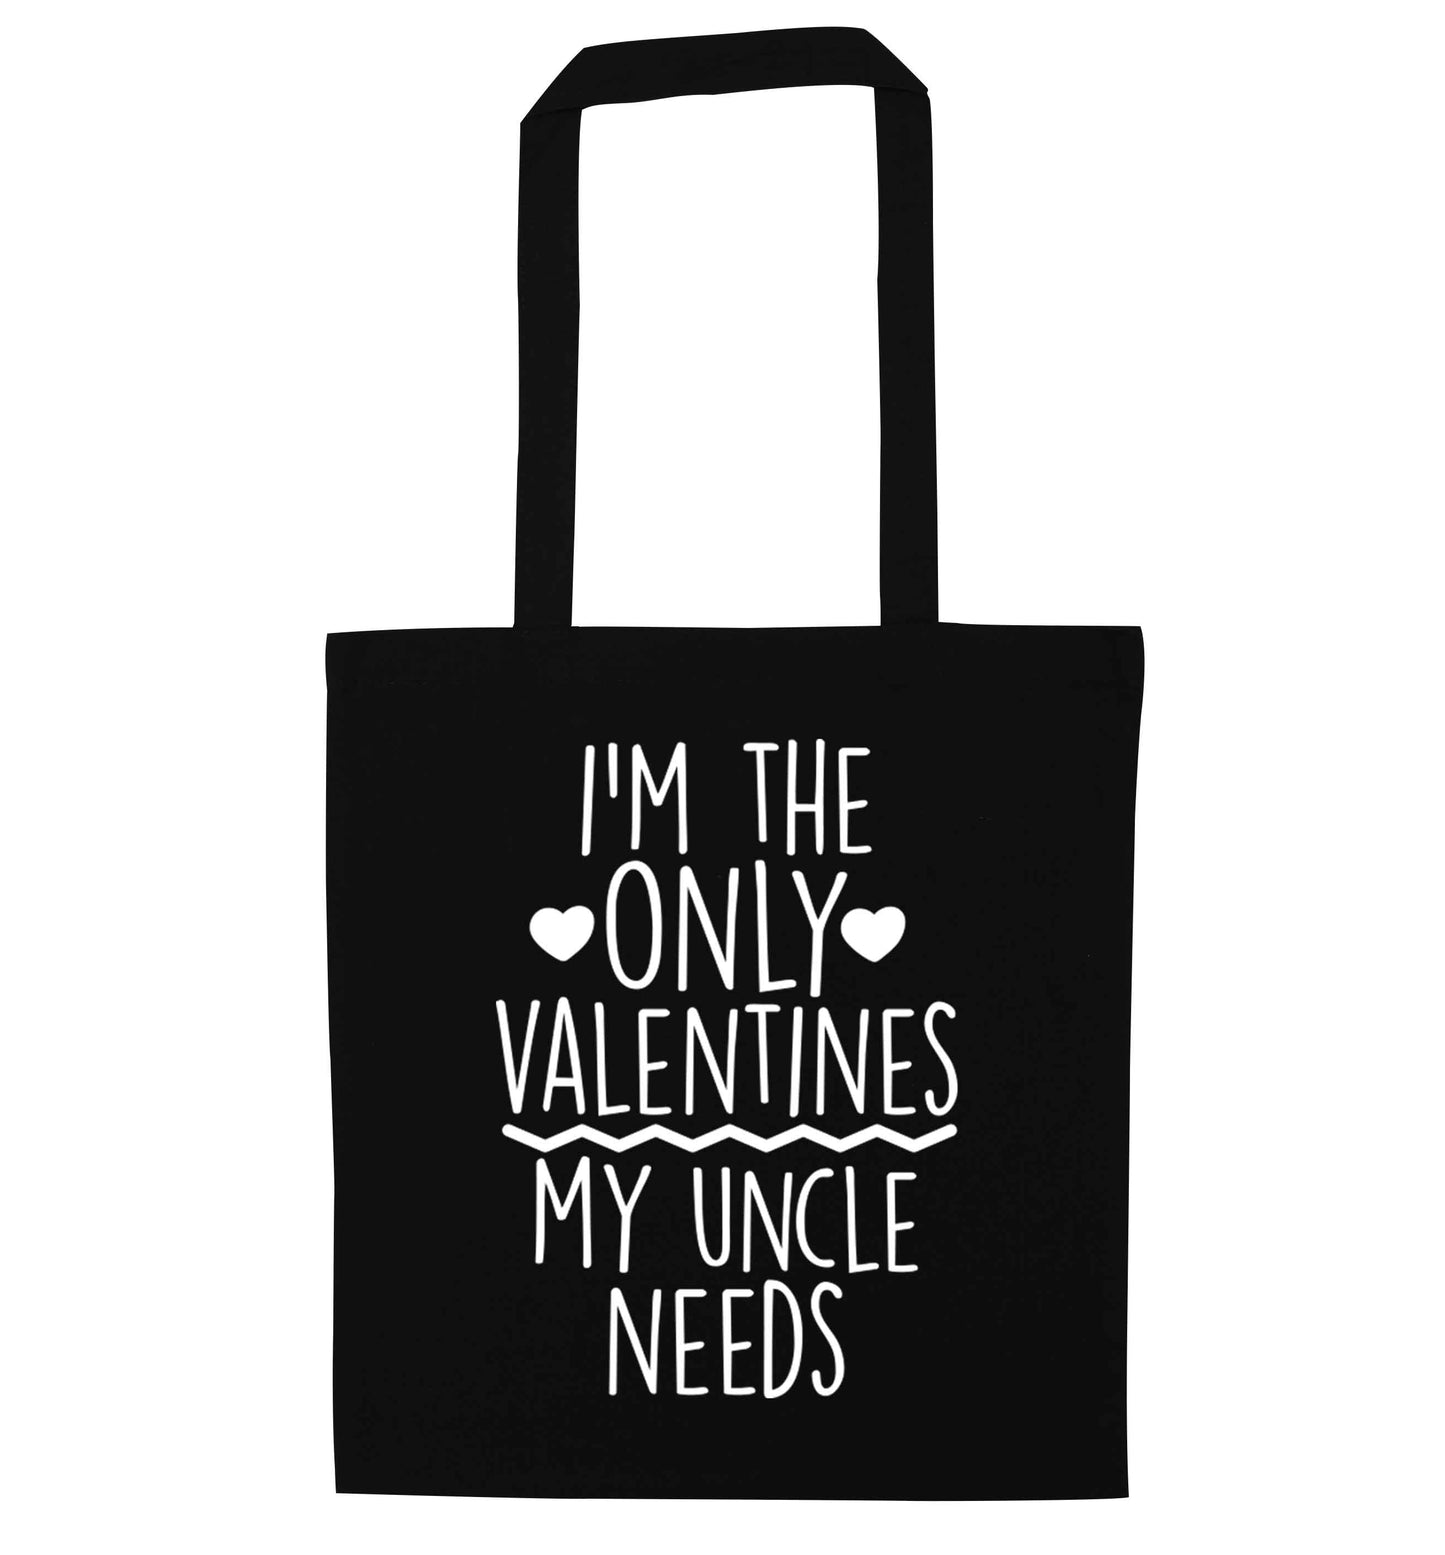 I'm the only valentines my uncle needs black tote bag